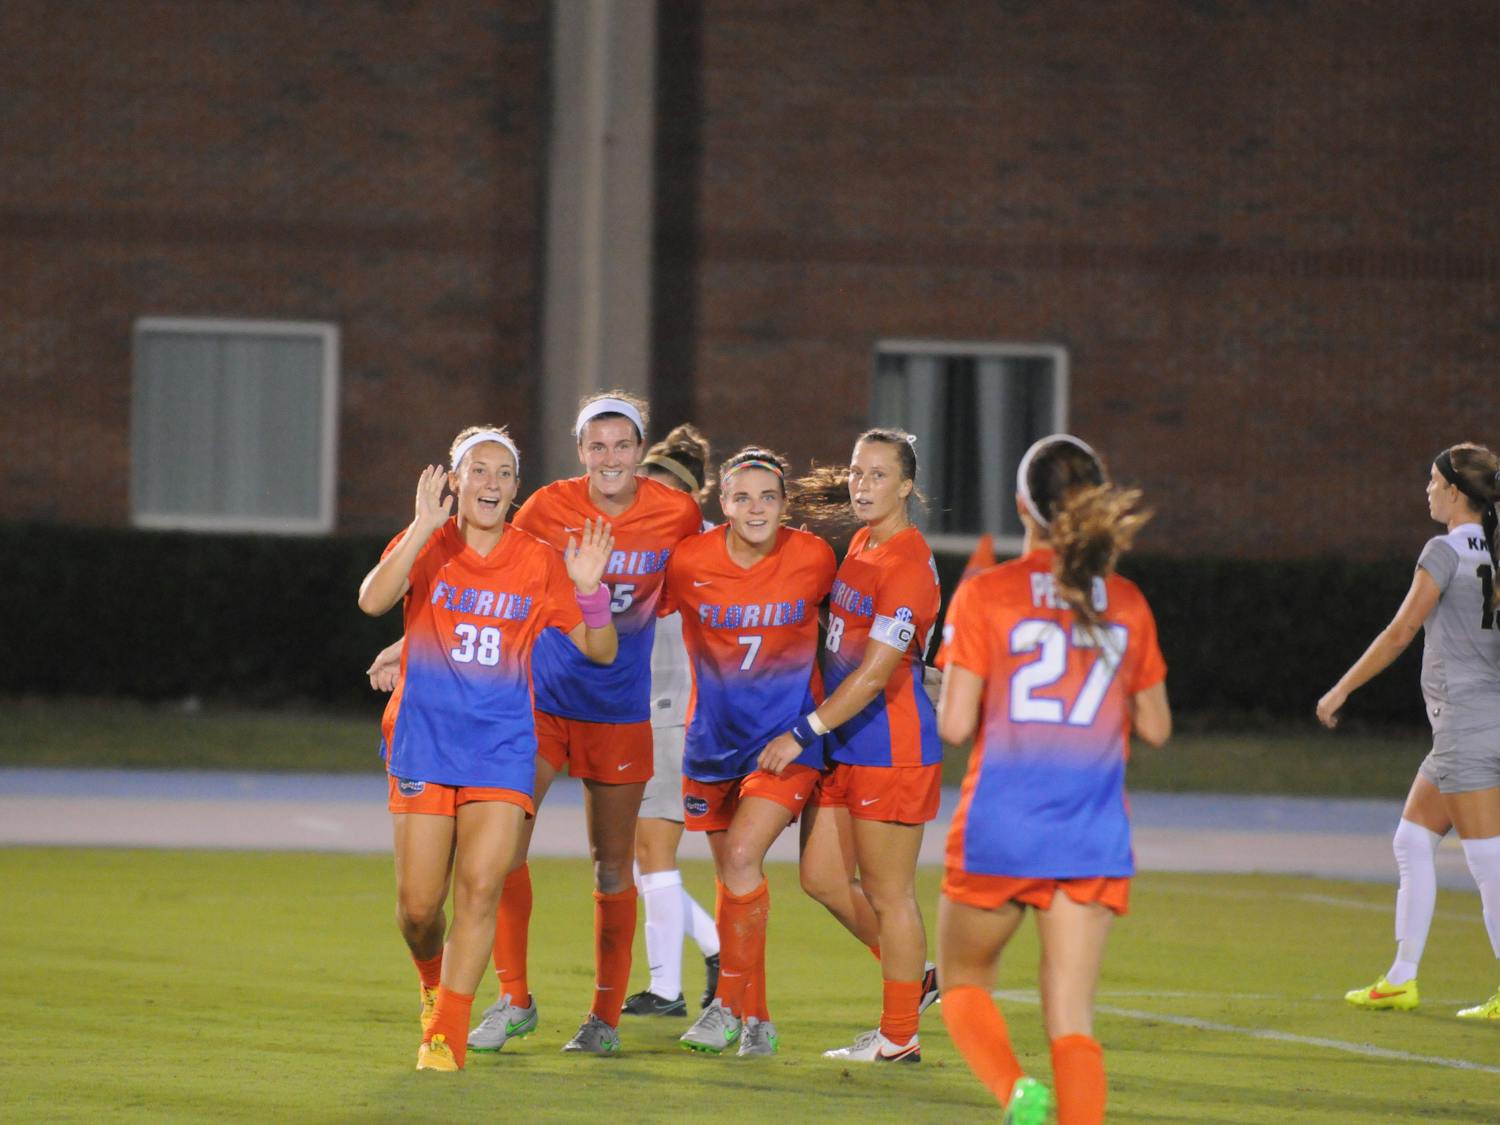 Mayra Pelayo (27) runs to celebrate with her teammates during Florida's 3-2 win over UCF on Sept. 18, 2016, at James G. Pressly Stadium.